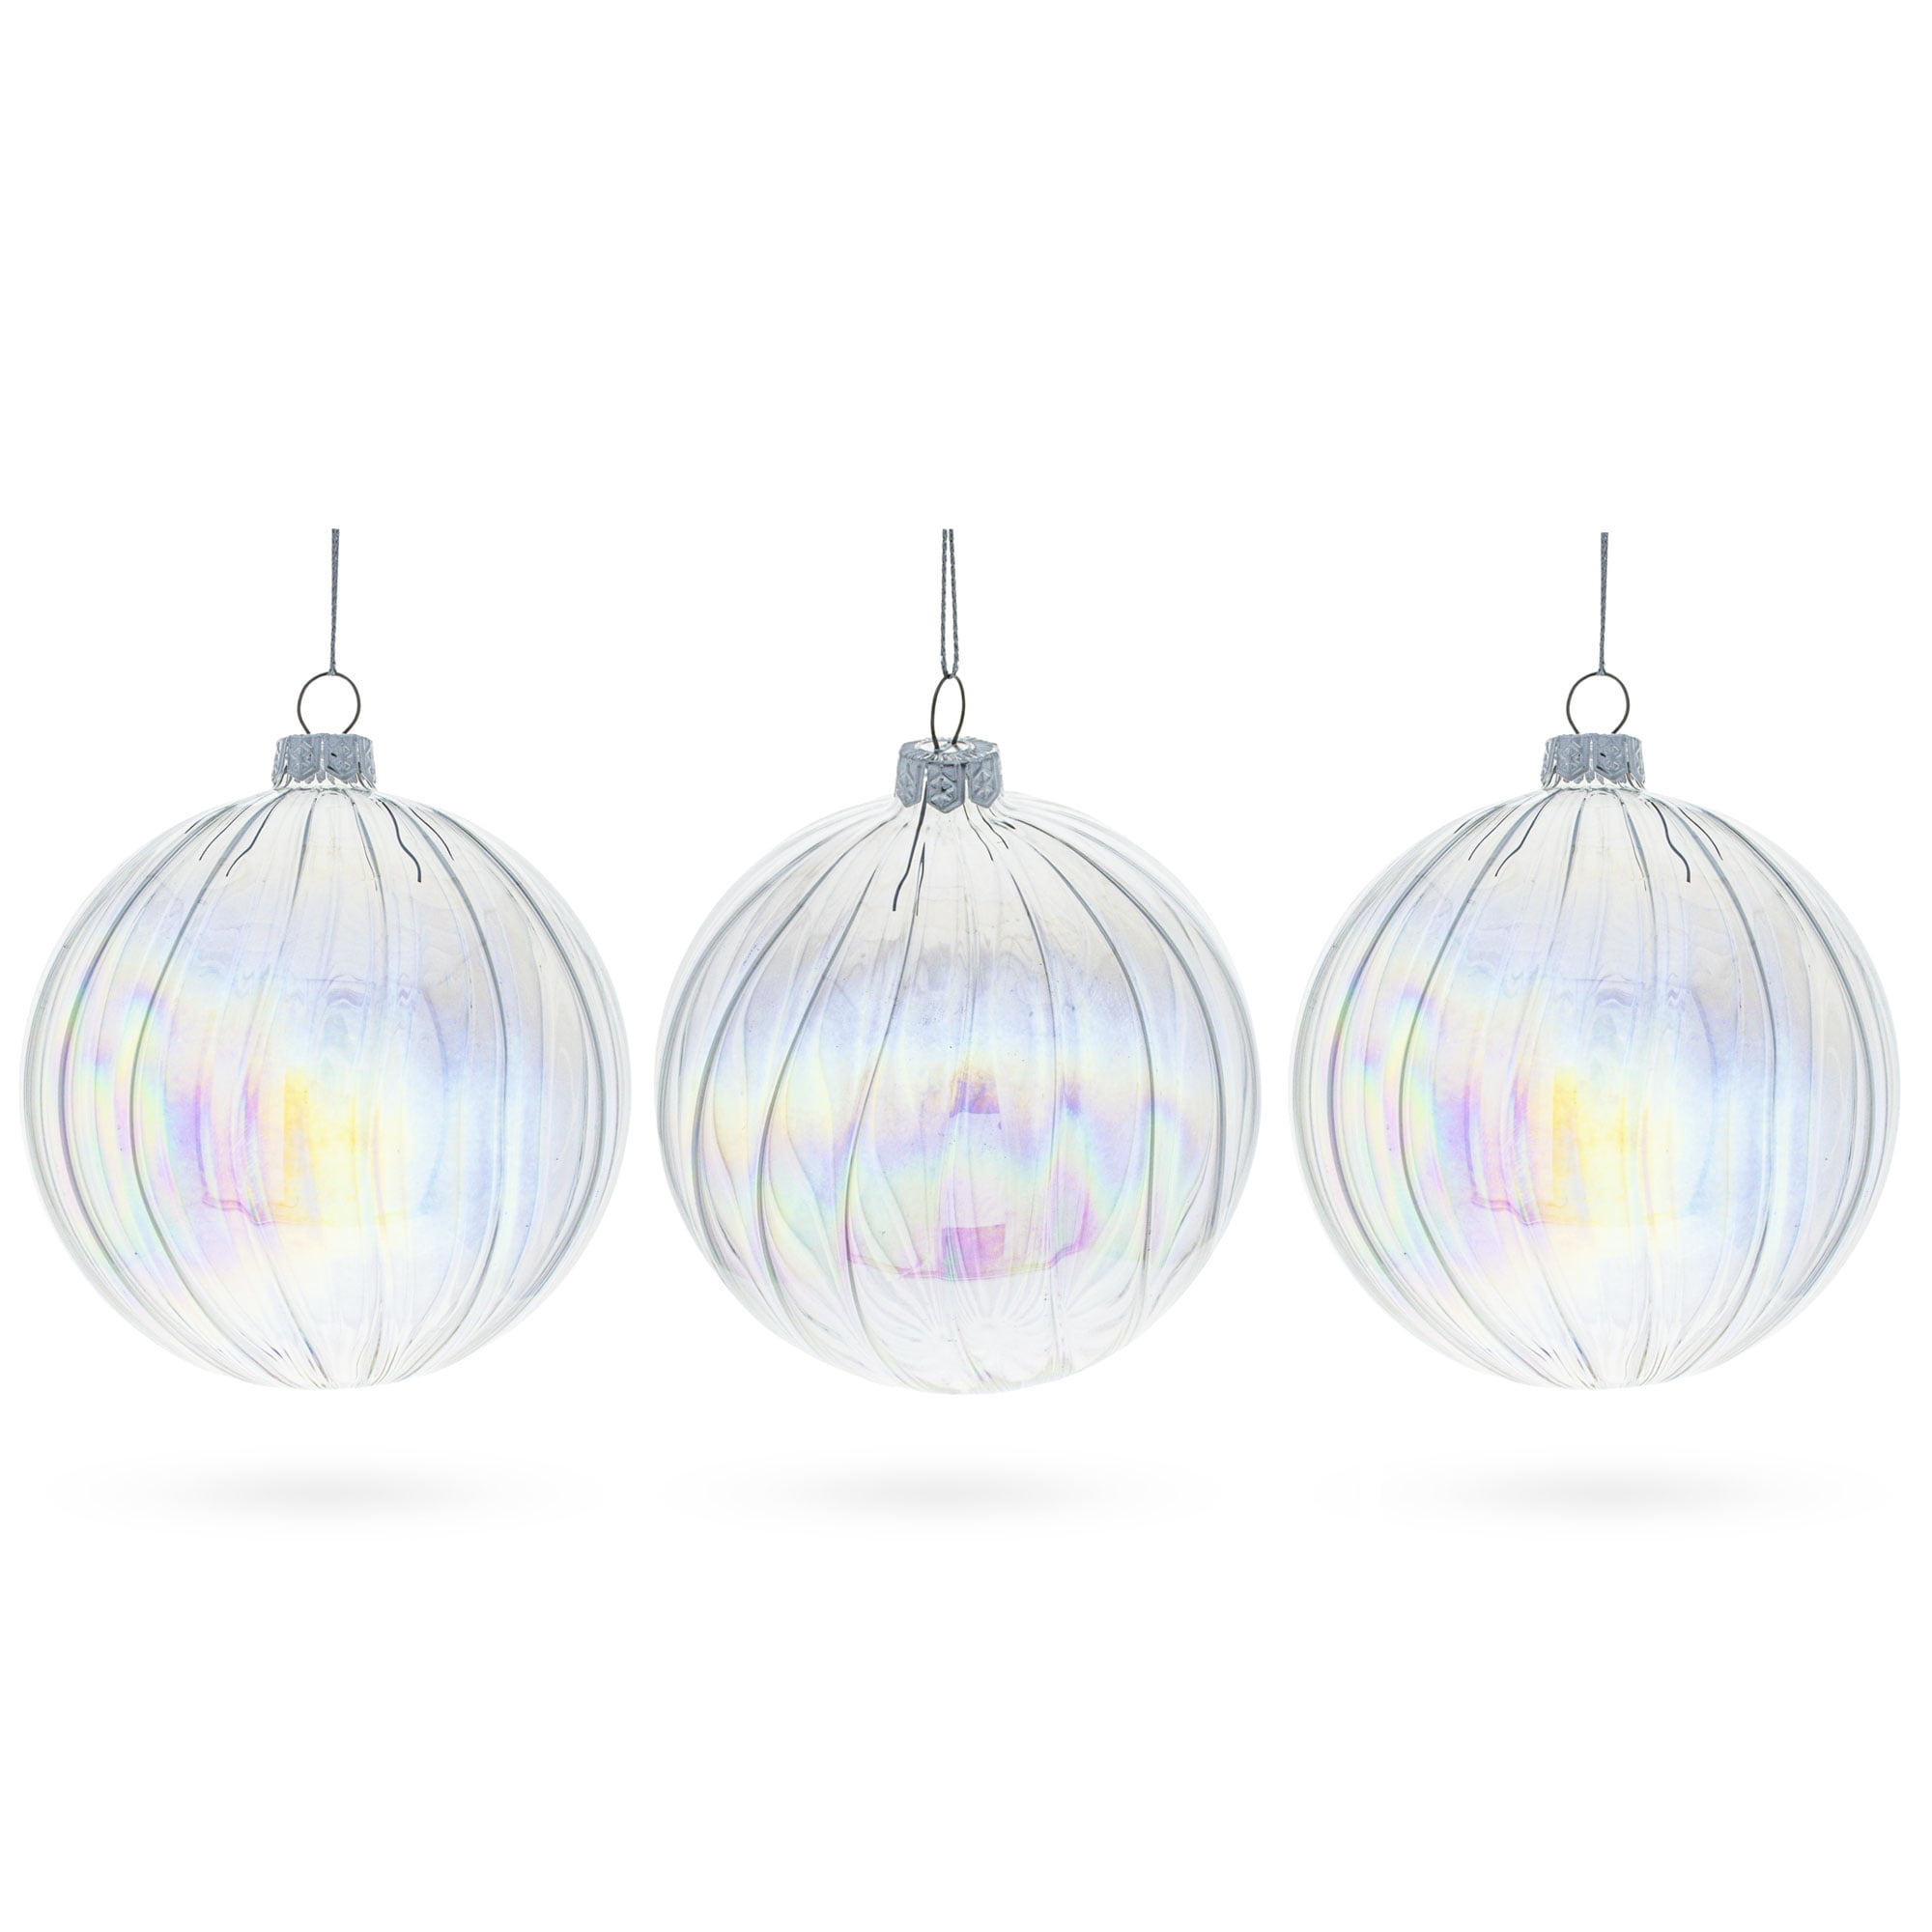 iridescent christmas ornaments - Google Search